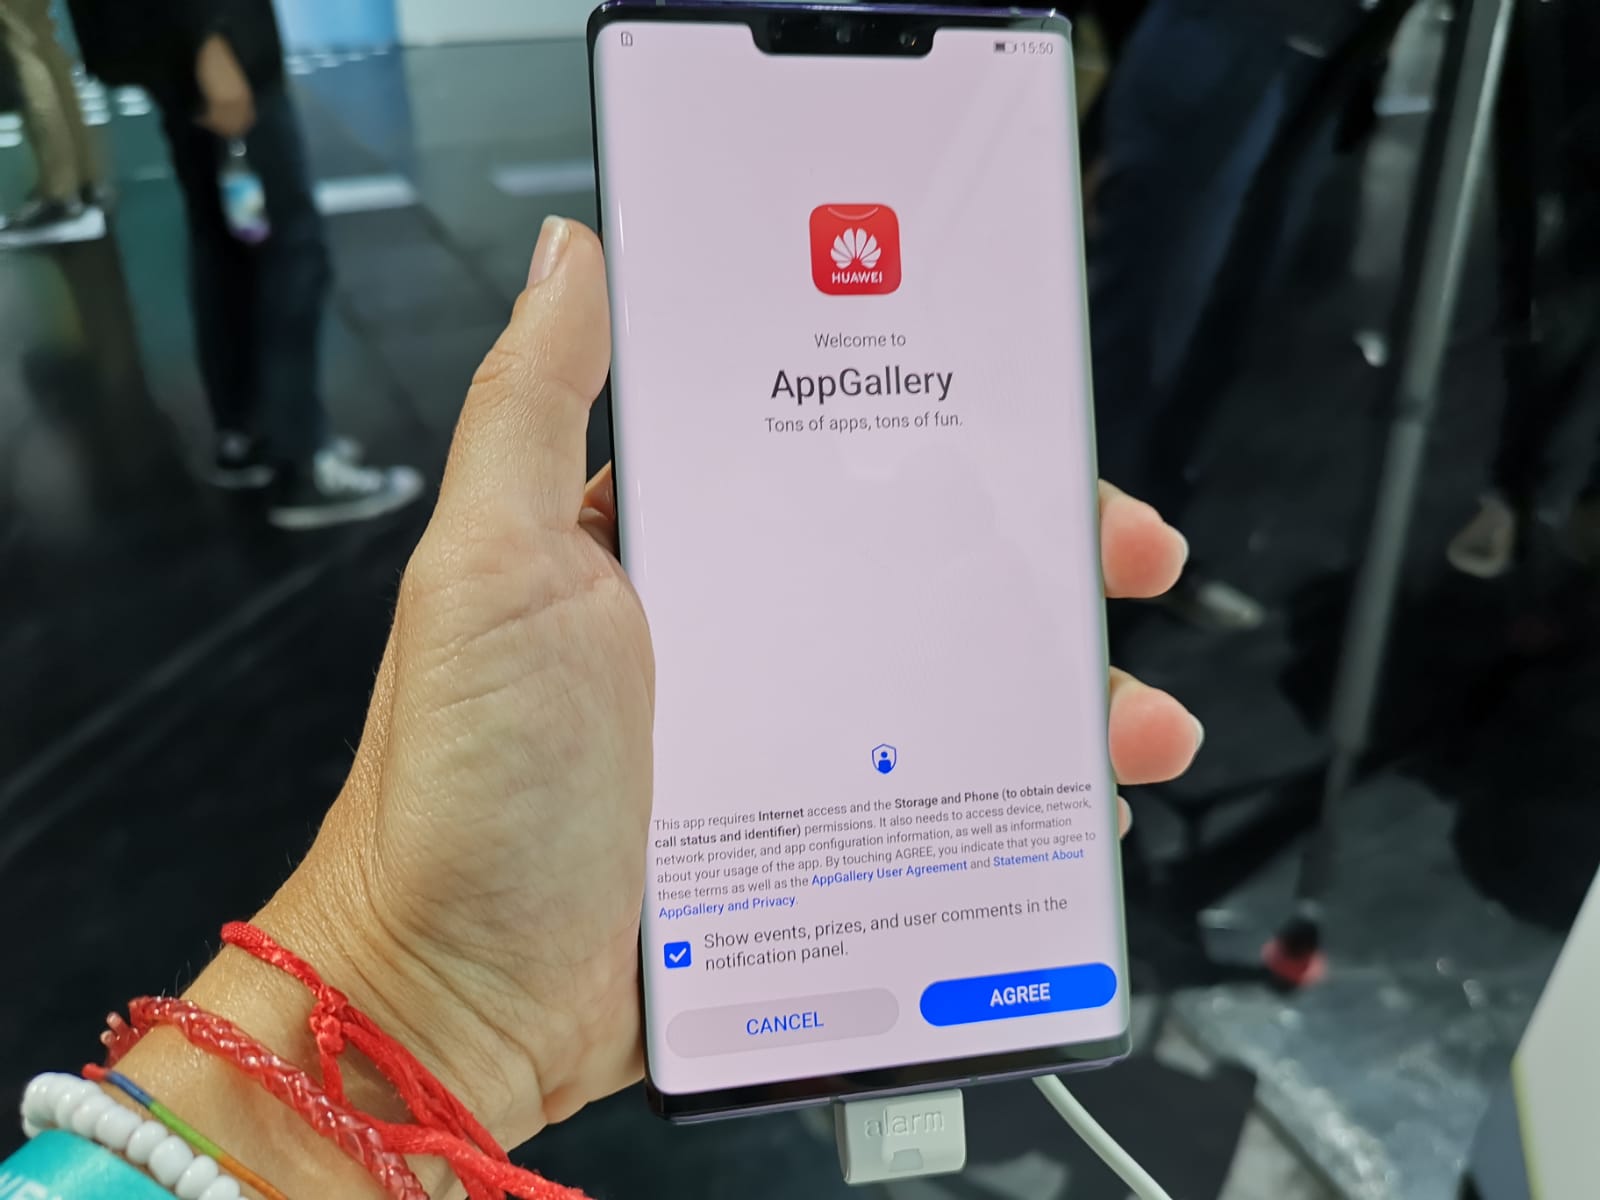 opinion evento huawei septiembre 2019 whatsapp image 09 19 at 16 29 11